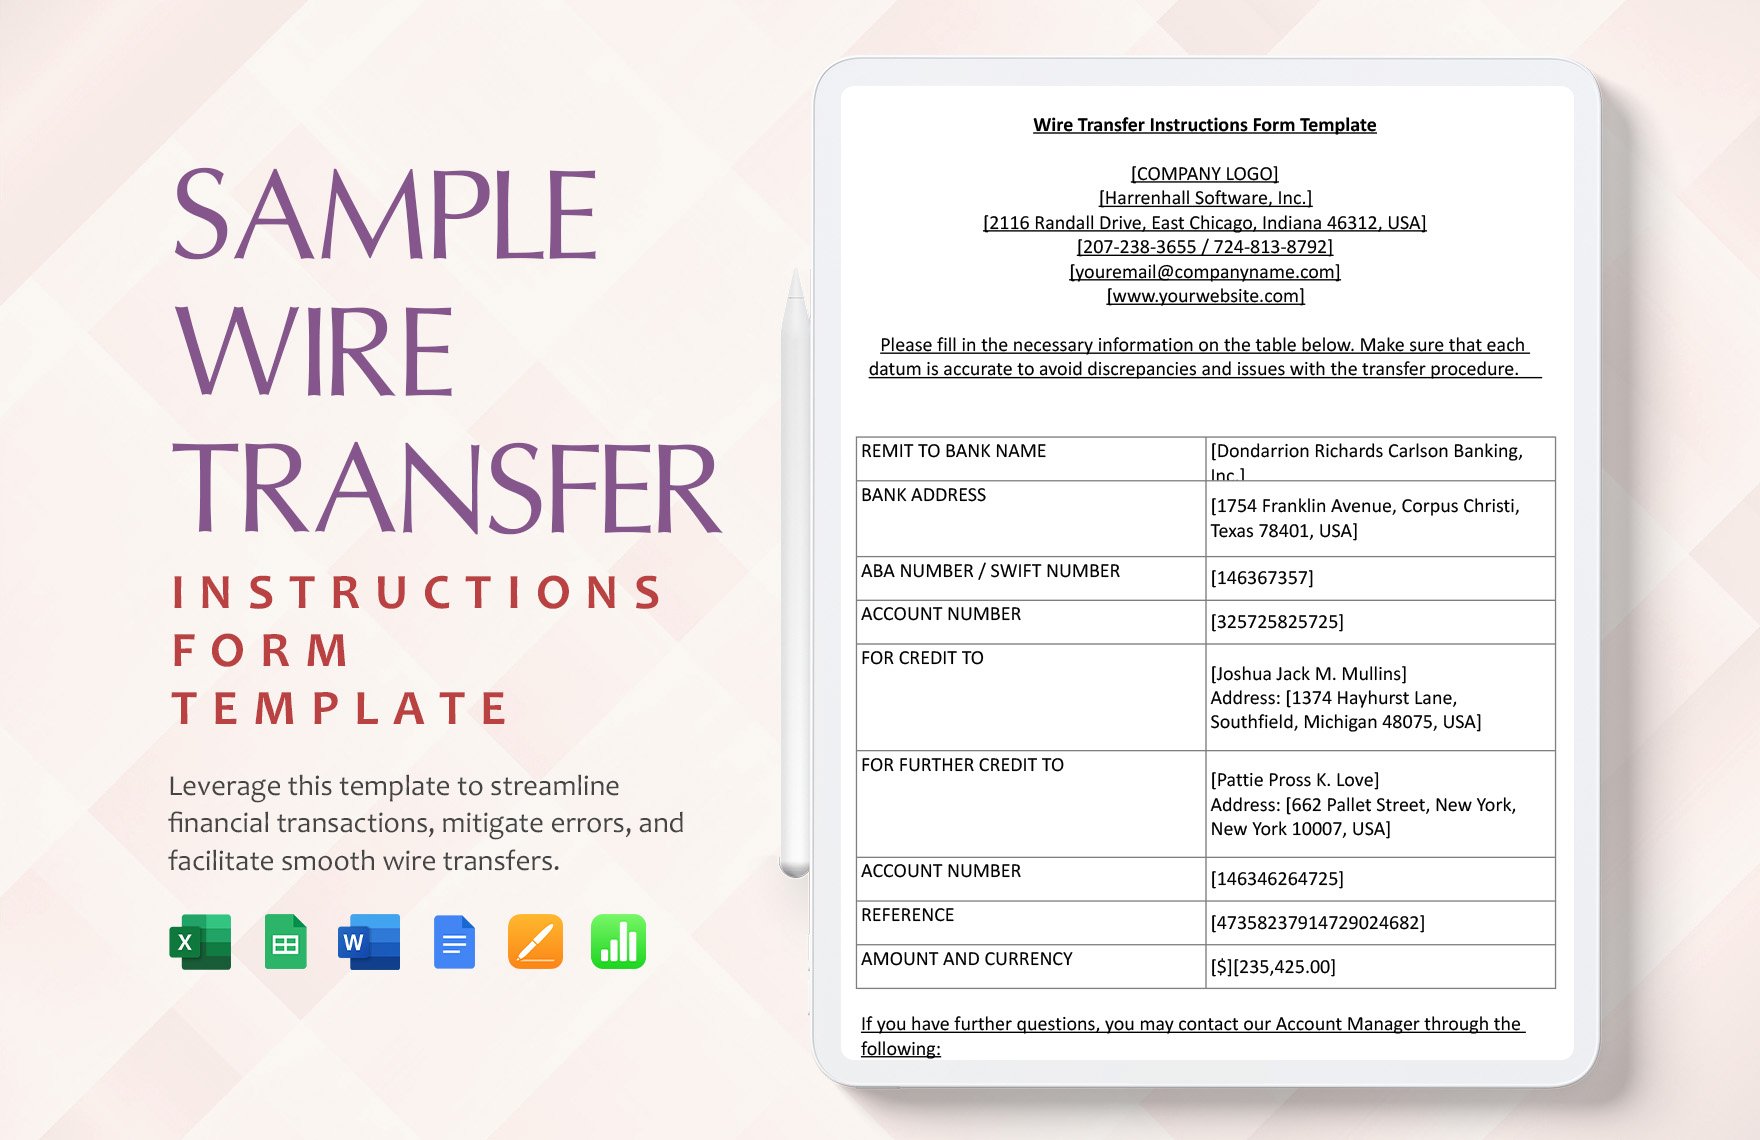 Sample Wire Transfer Instructions Form Template